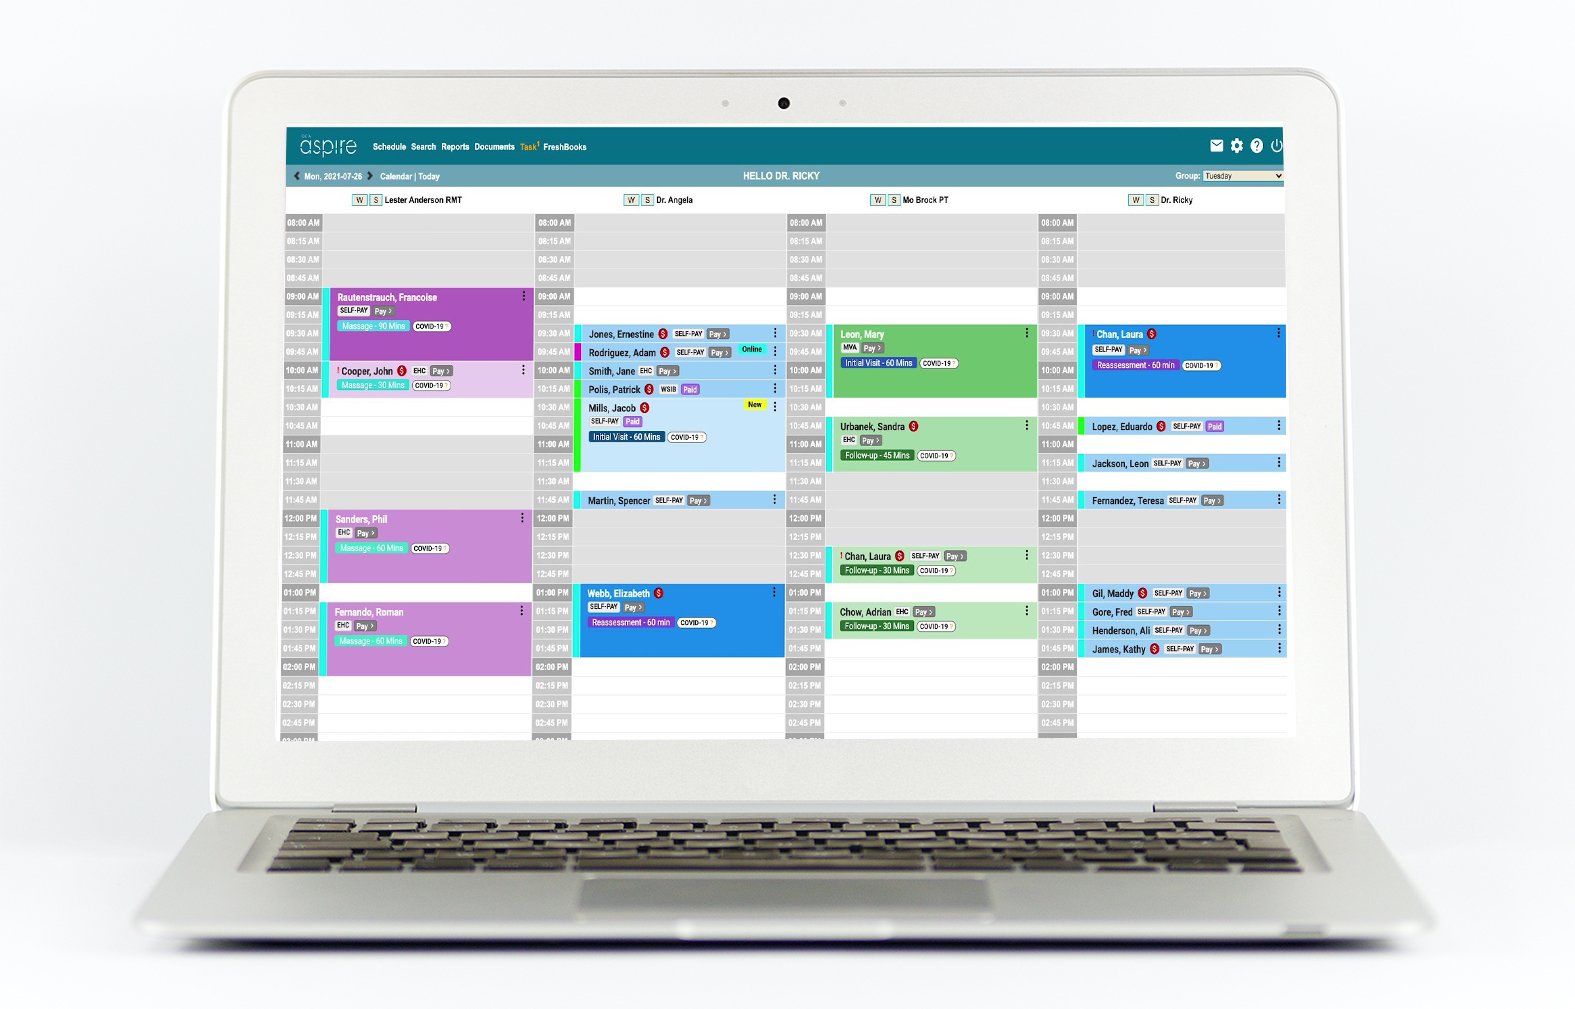 OCA Aspire practice management clinic schedule. Manage your clinic scheduling and billing all in one screen. Customize your schedule to your unique workflow with the colors, groups, timeslots, and so much more. Practice management scheduling, made easy.